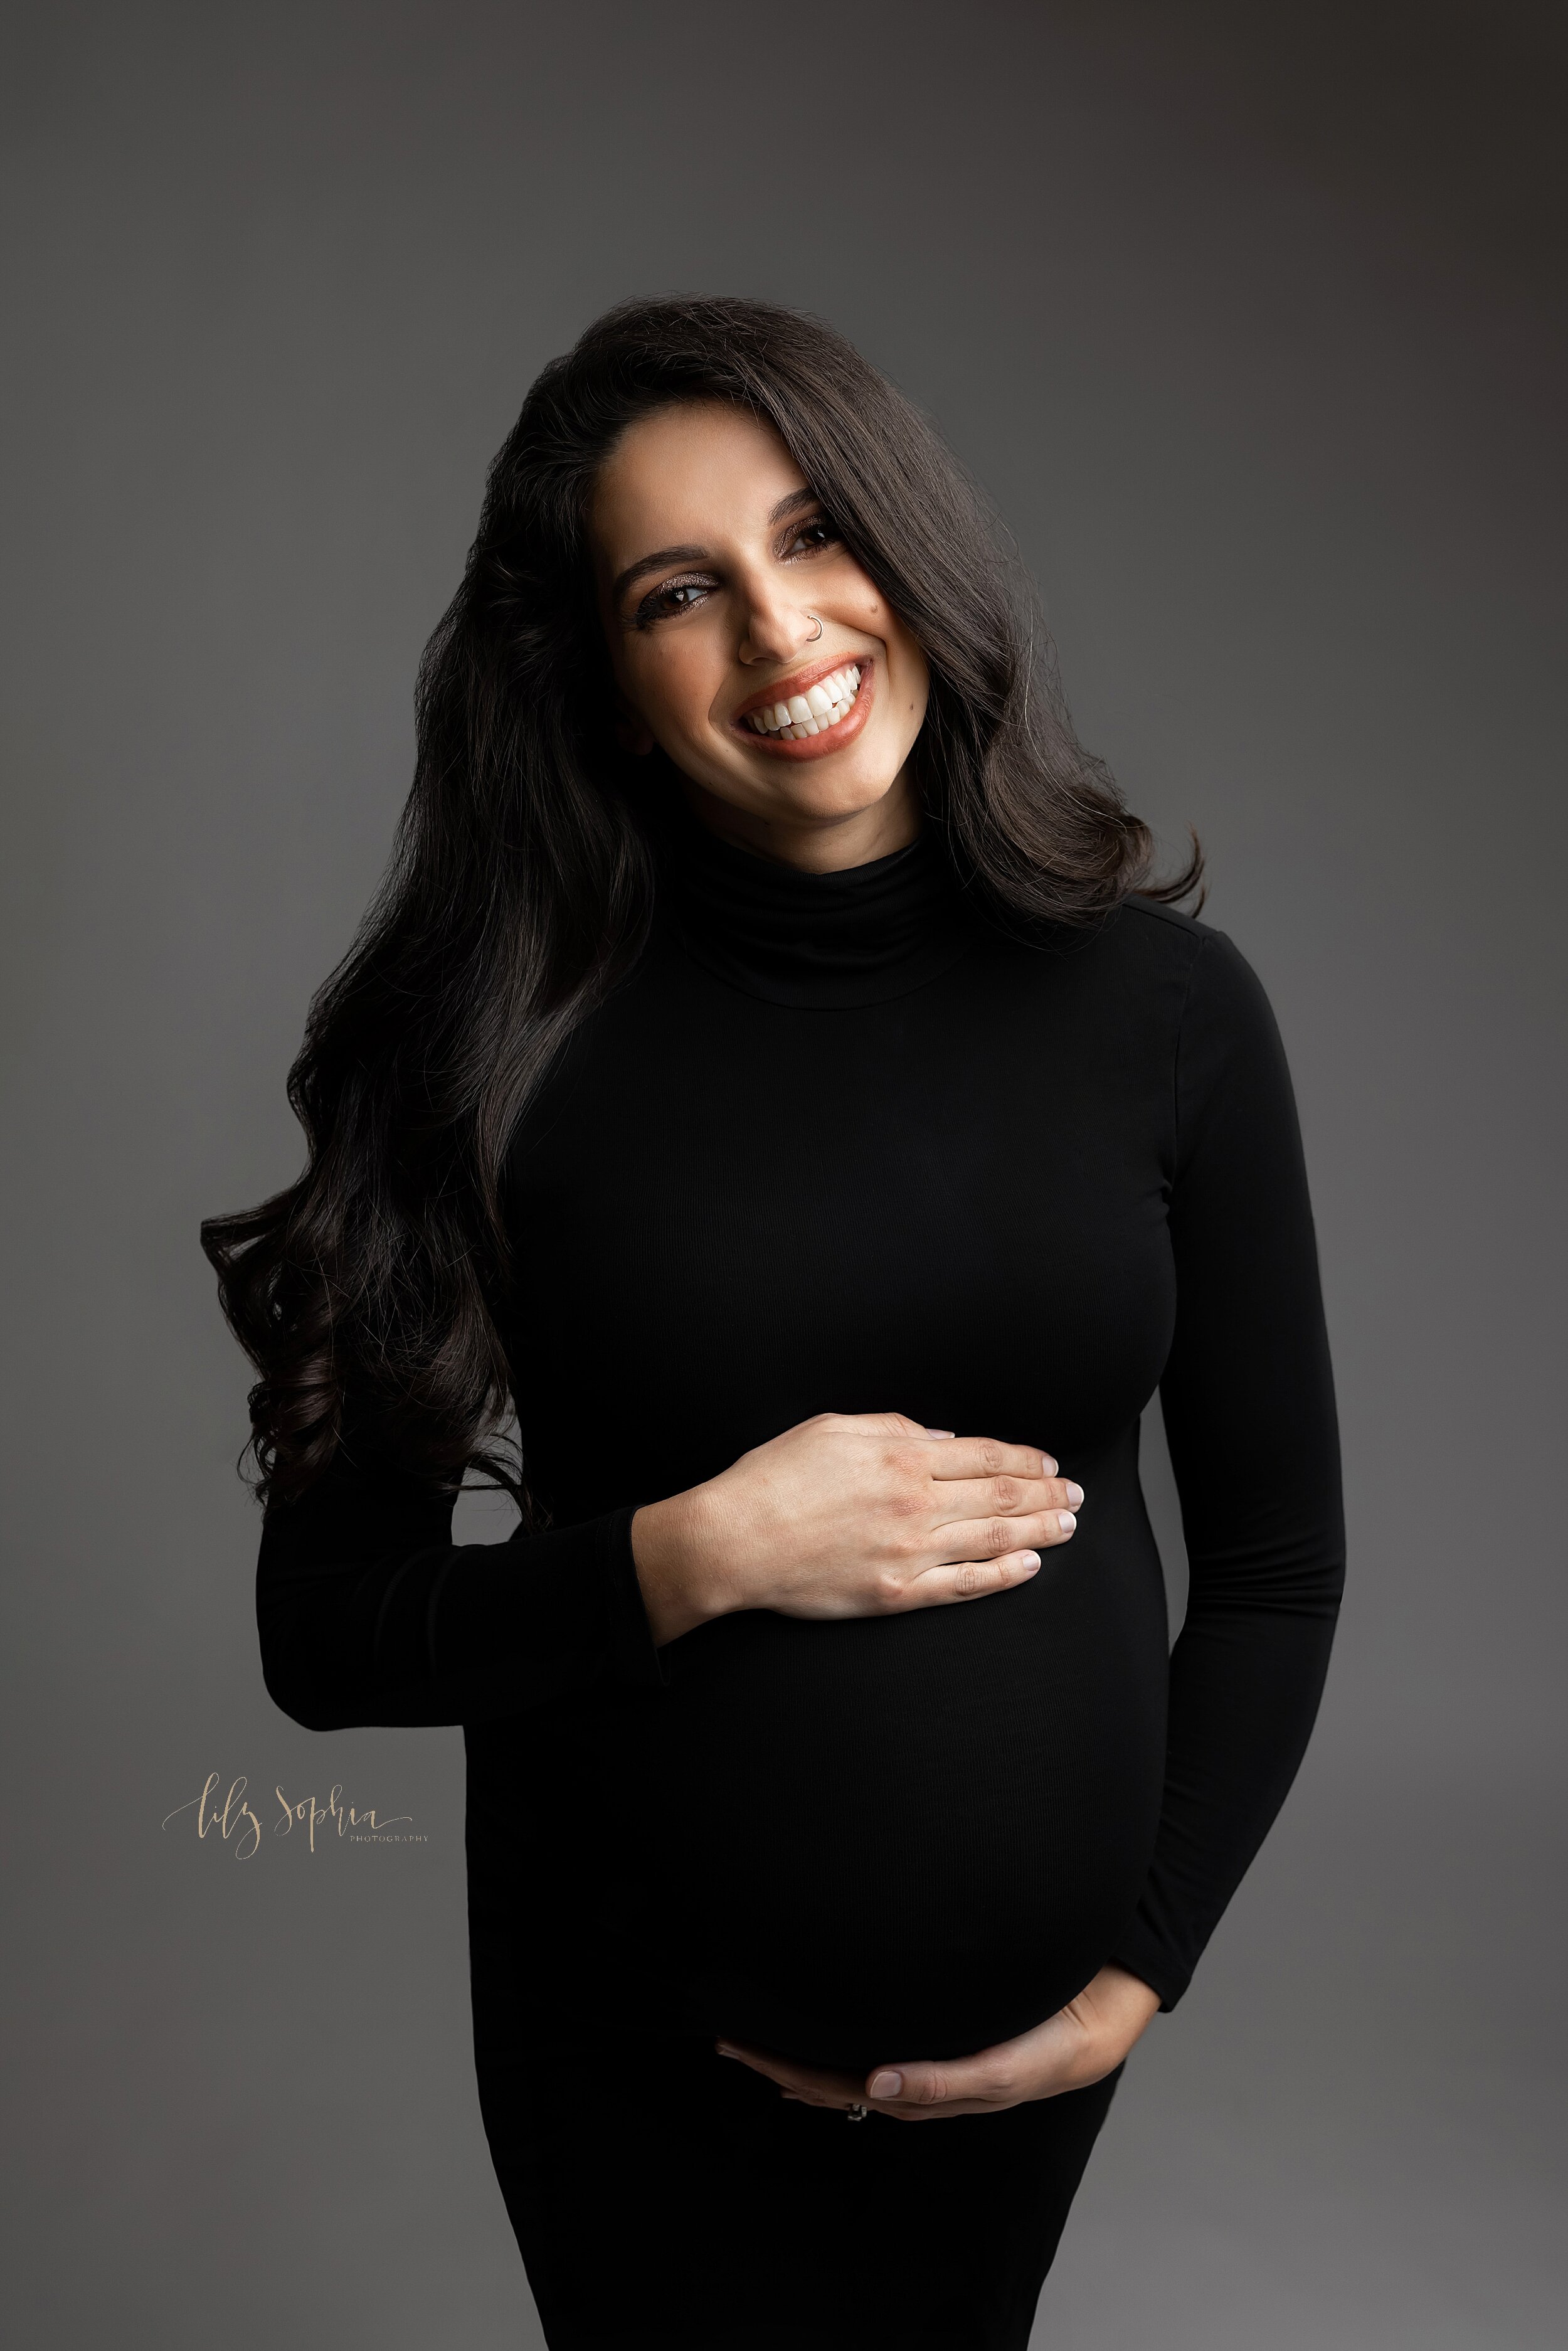  Fine Art modern maternity studio picture of happy smiling pregnant woman with long curly brown hair wearing black mock neck body con dress and cradling her baby bump in Atlanta, Georgia.  